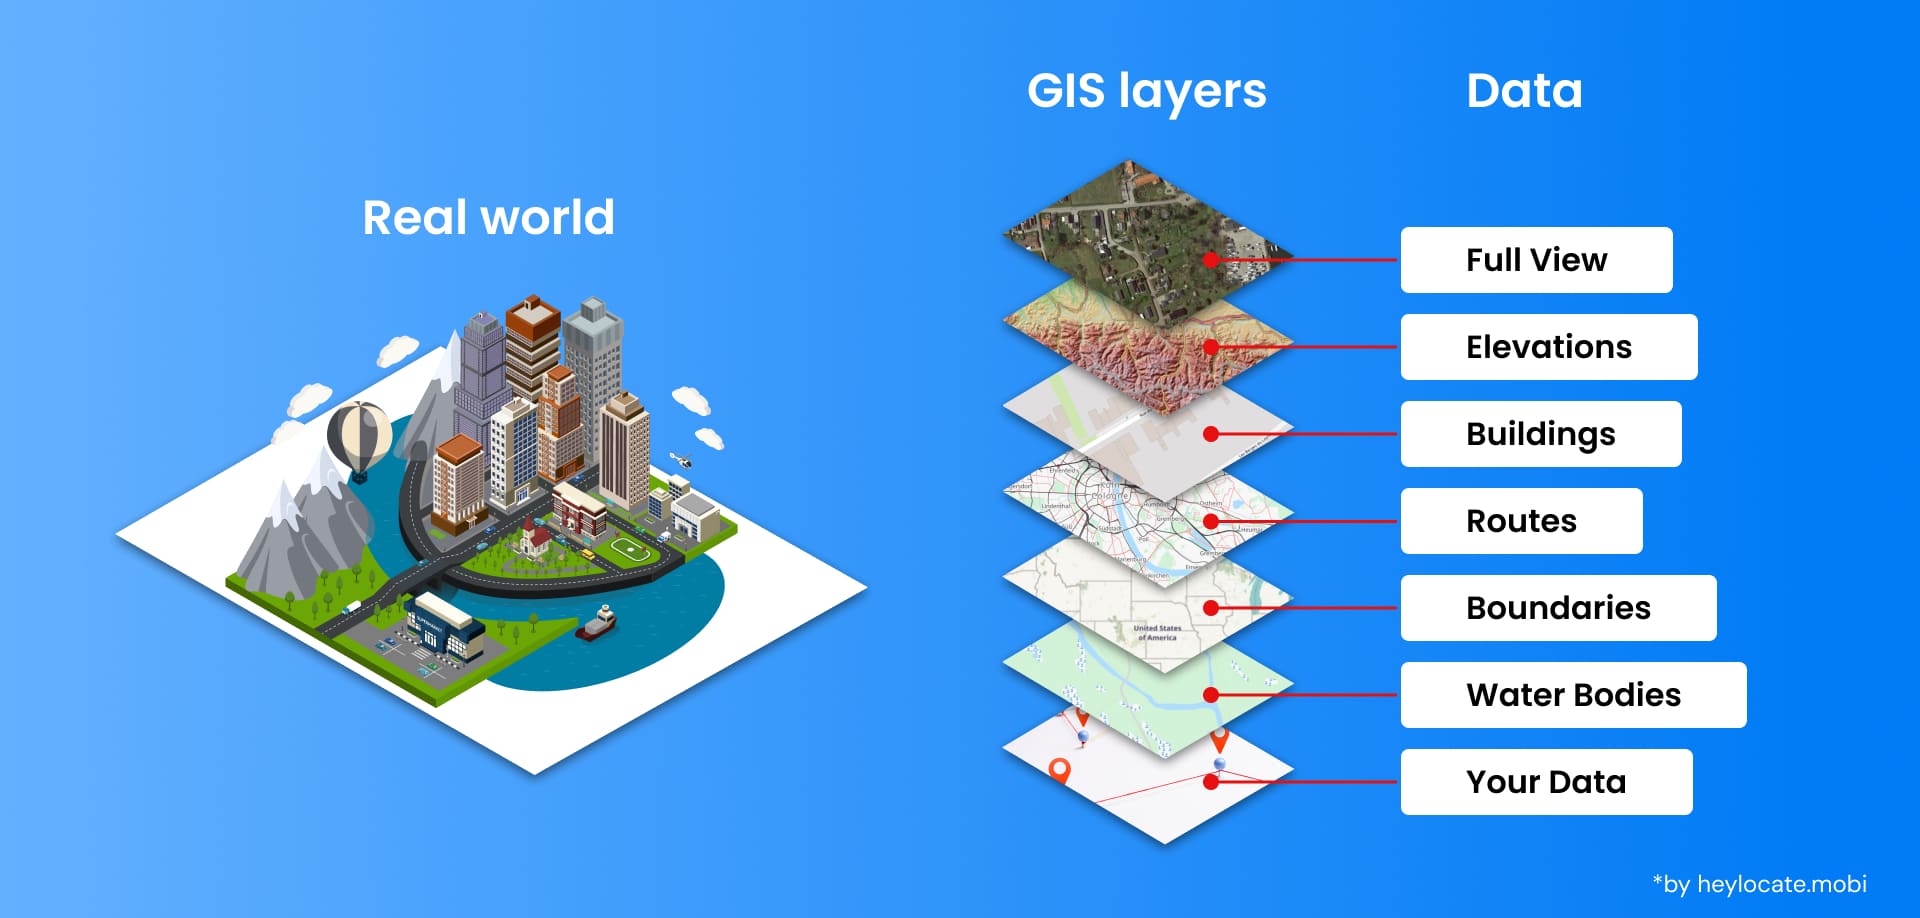 An illustration that shows what the real world looks like and what GIS layers a map consists of to represent it